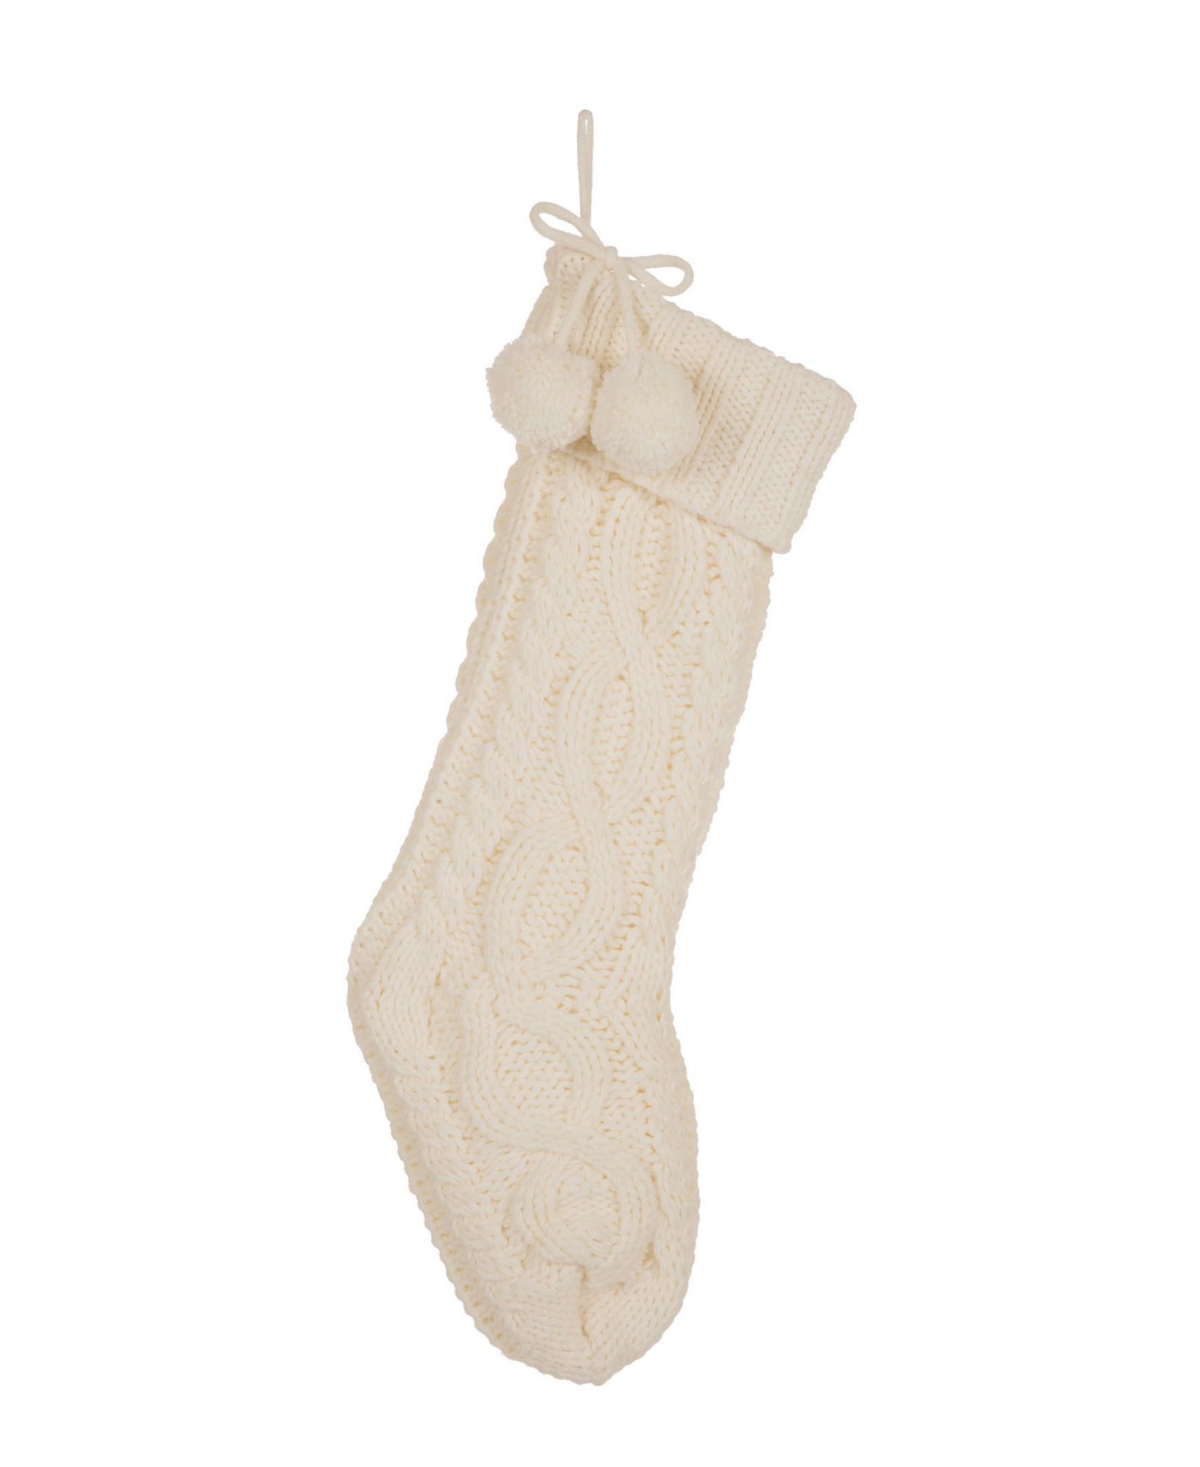 24" L Knitted Polyester Christmas Stocking with Pom Pom Ball - White